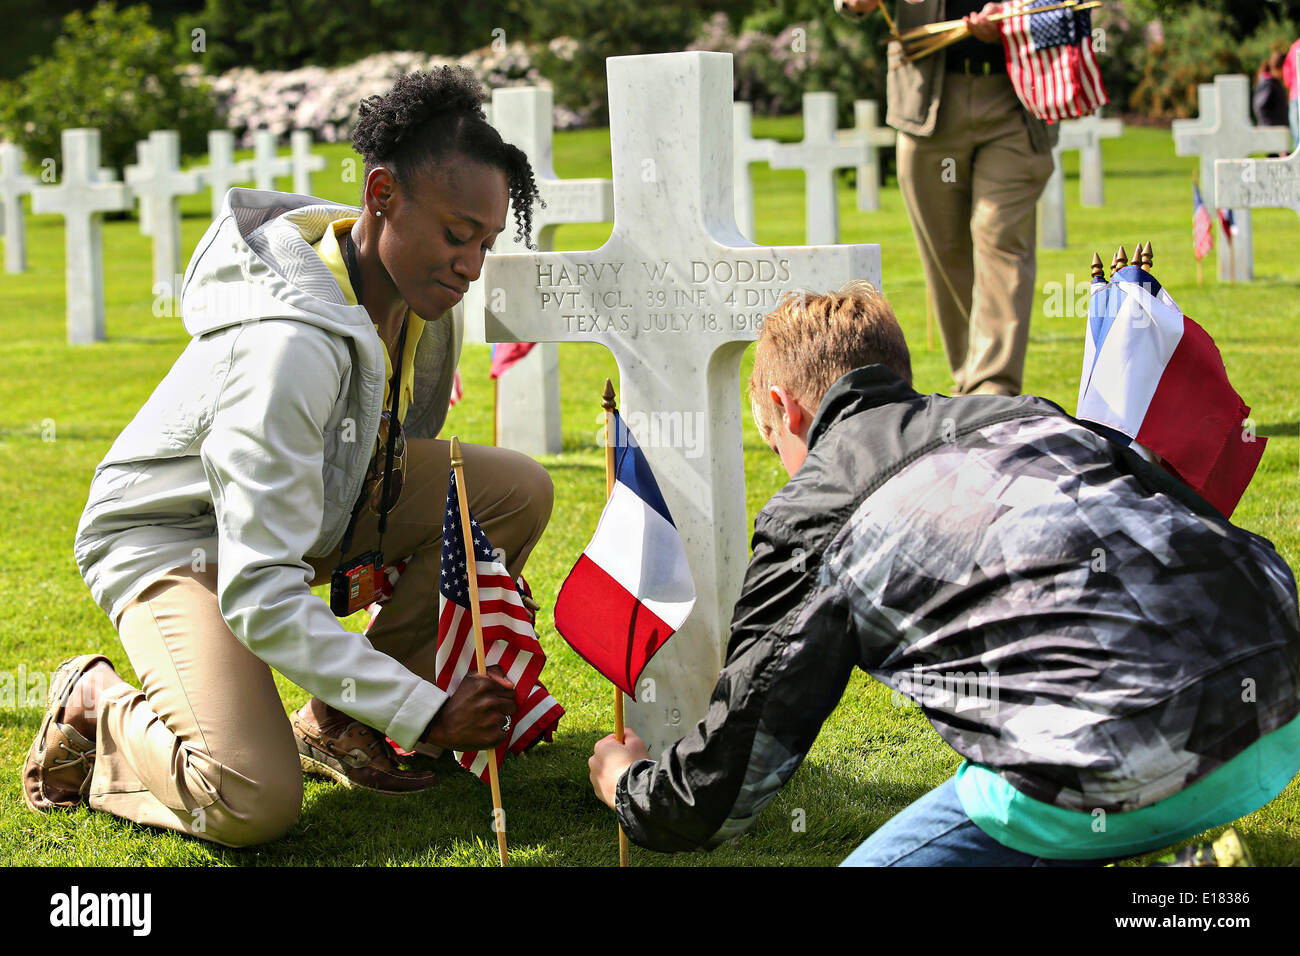 French and American children place flags at the graves of soldiers during a ceremony to mark the 96th anniversary of the historic Battle of Belleau Wood and Memorial Day at Aisne-Marne American Cemetery May 24, 2014 in Belleau, France. Stock Photo